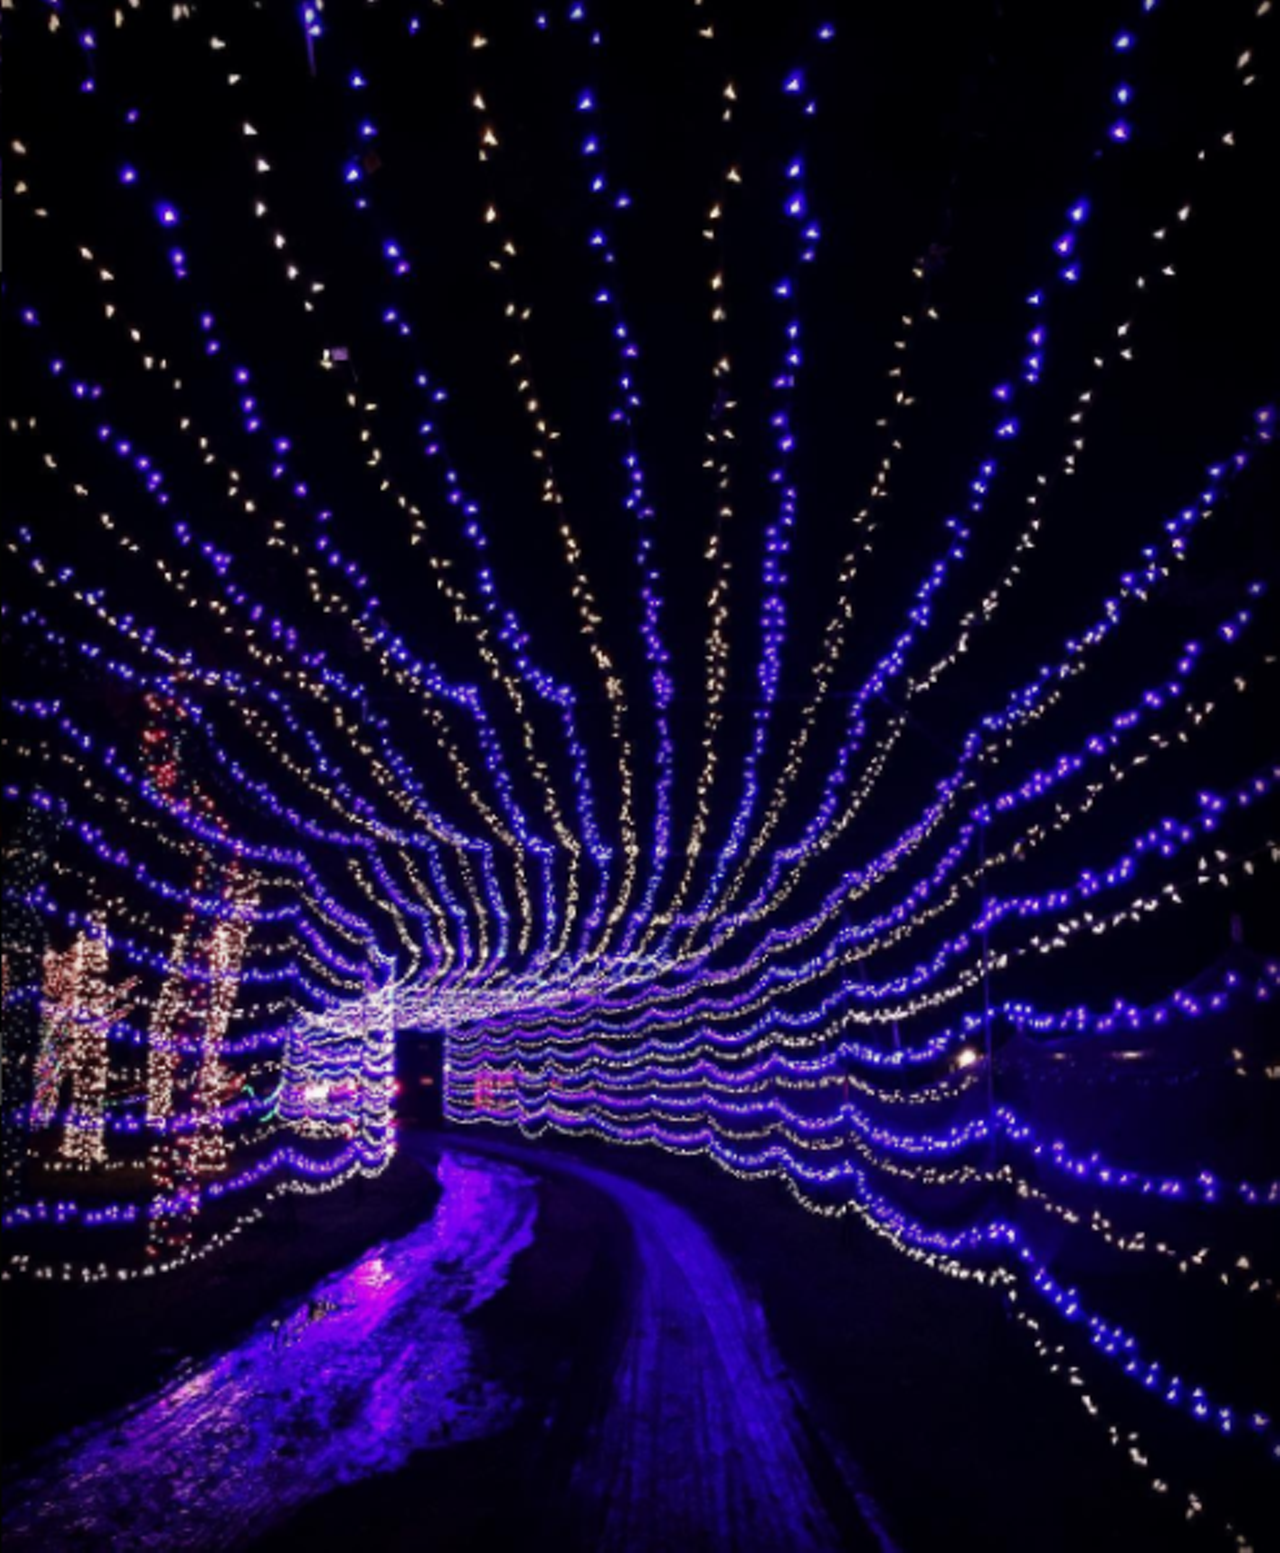 Santa's Ranch
9561 I-35, New Braunfels,  santasranch.net
Through January 1, you can check out the magical lights at Santa's Ranch right outside of San Antonio. 
Photo via Instagram,  brookehearted